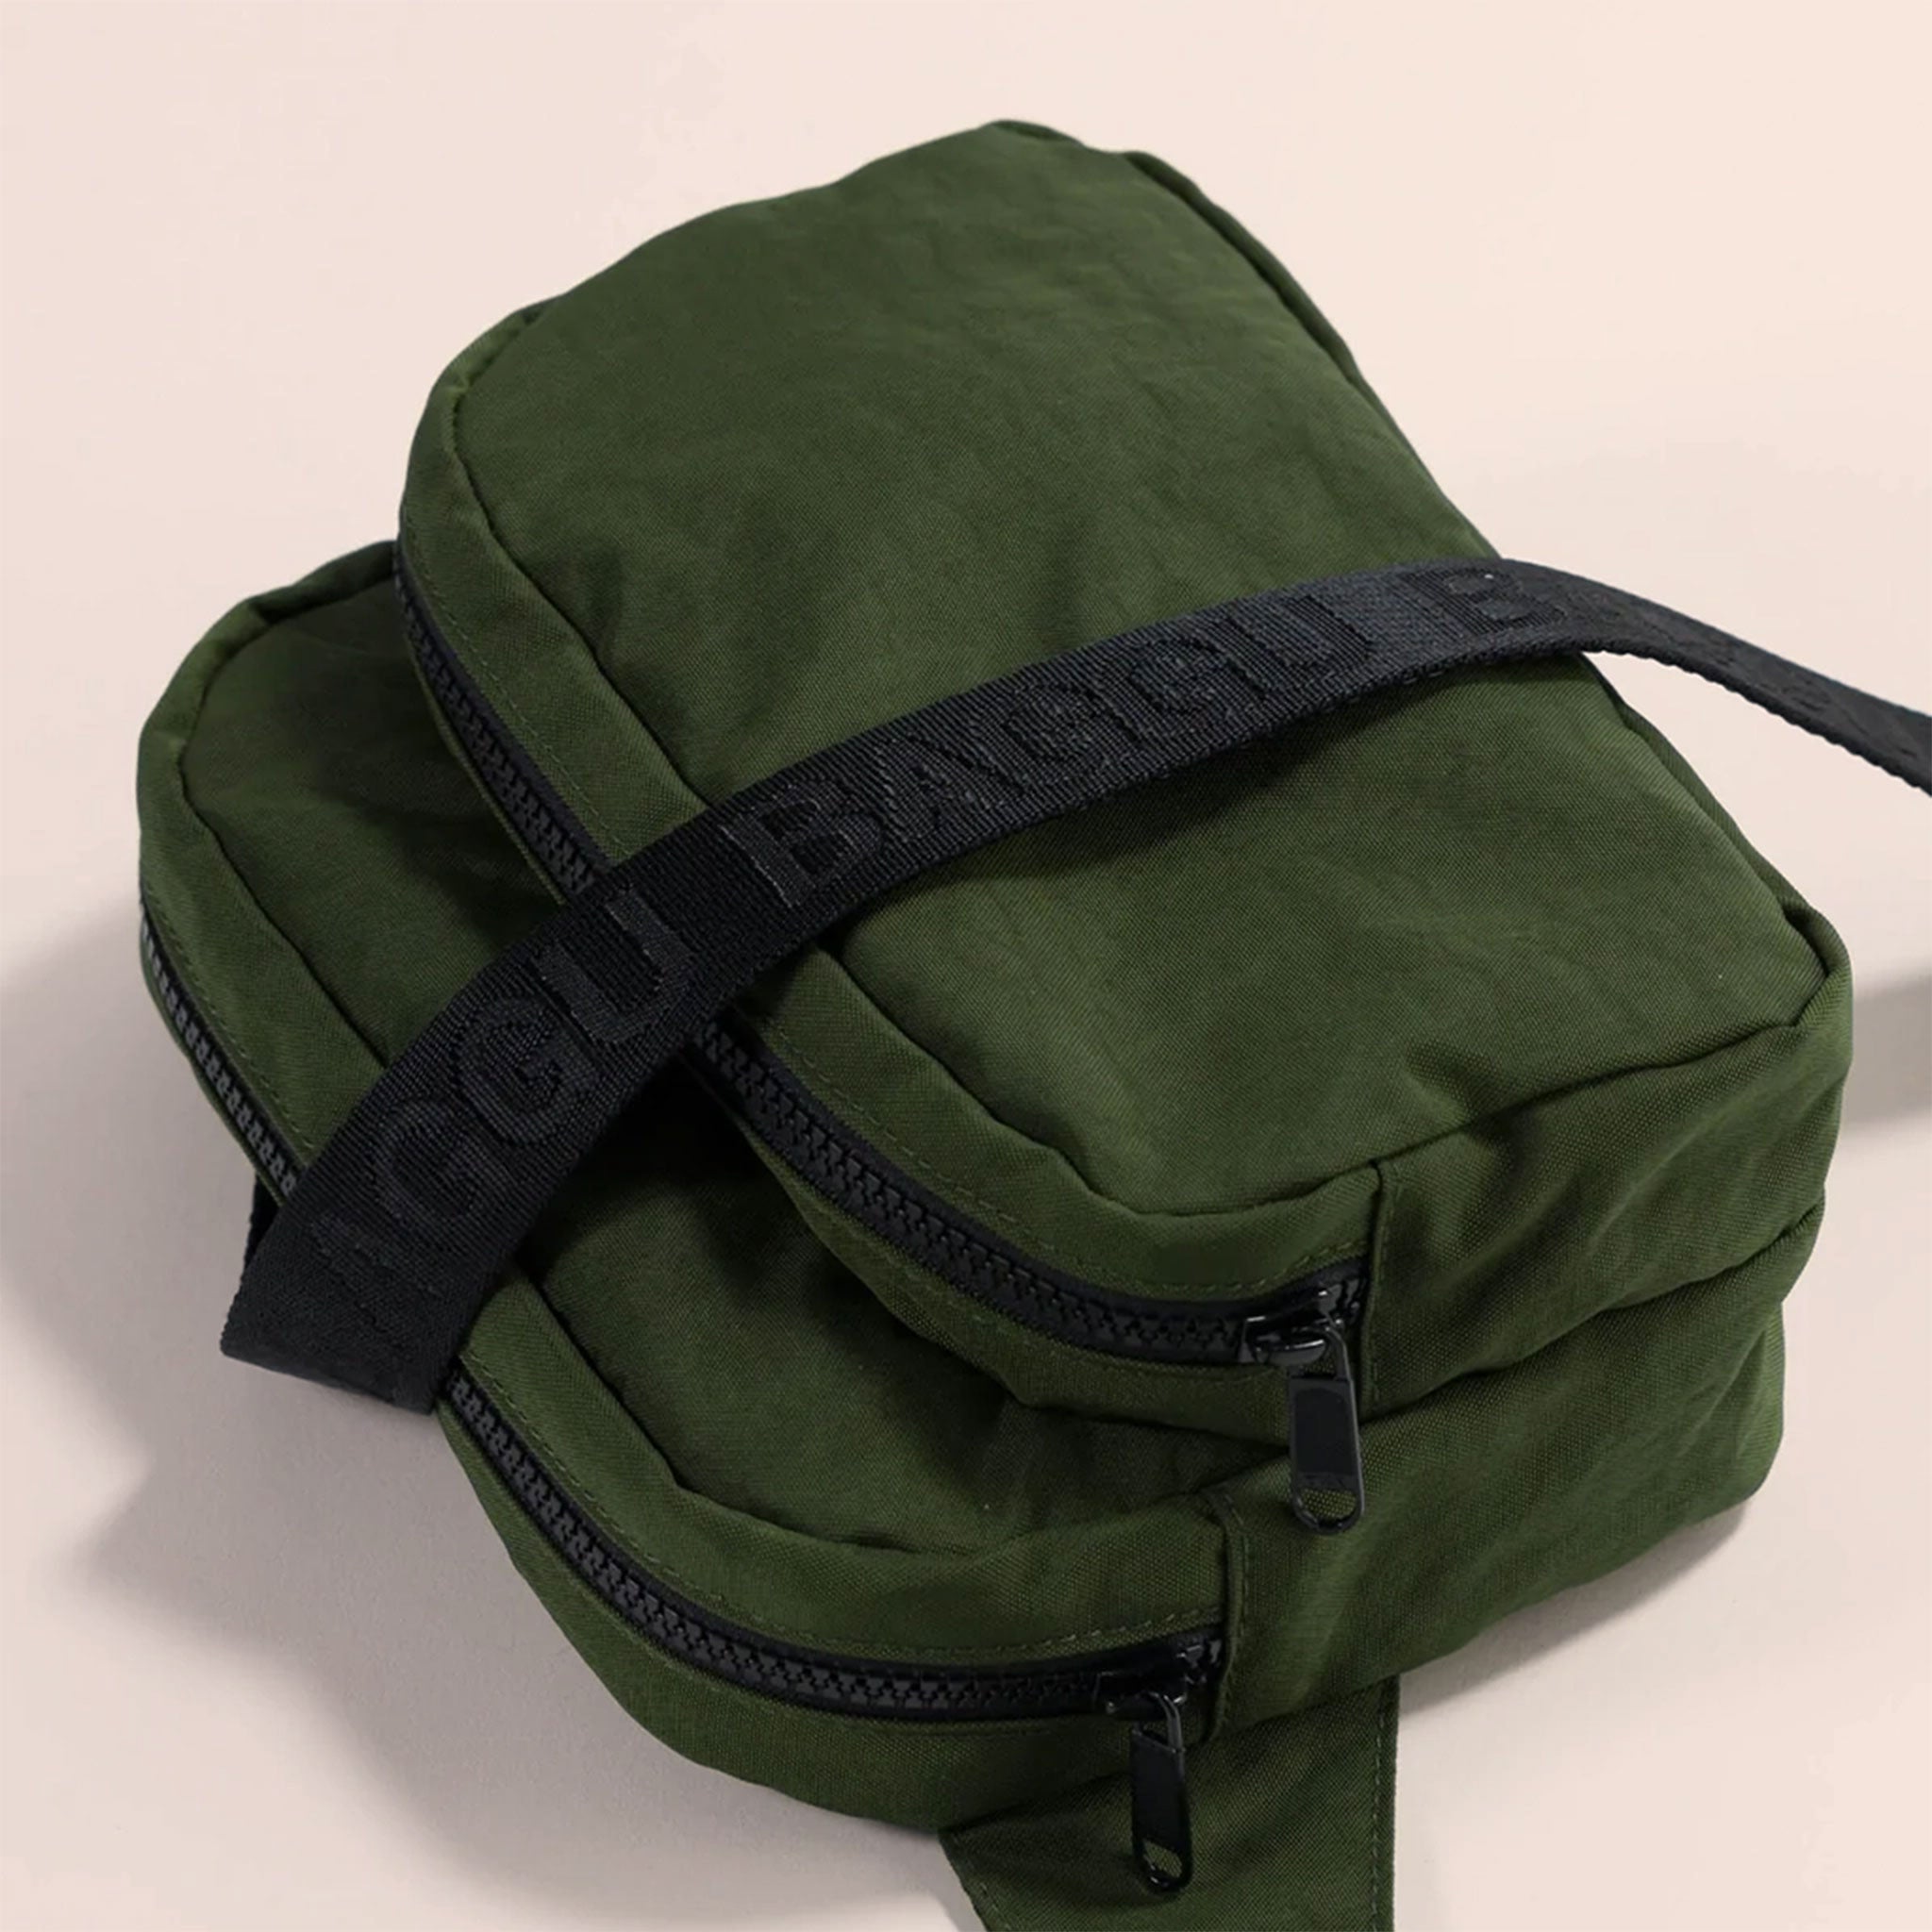 A dark green nylon fanny pack with two zipper pockets and a black adjustable strap.